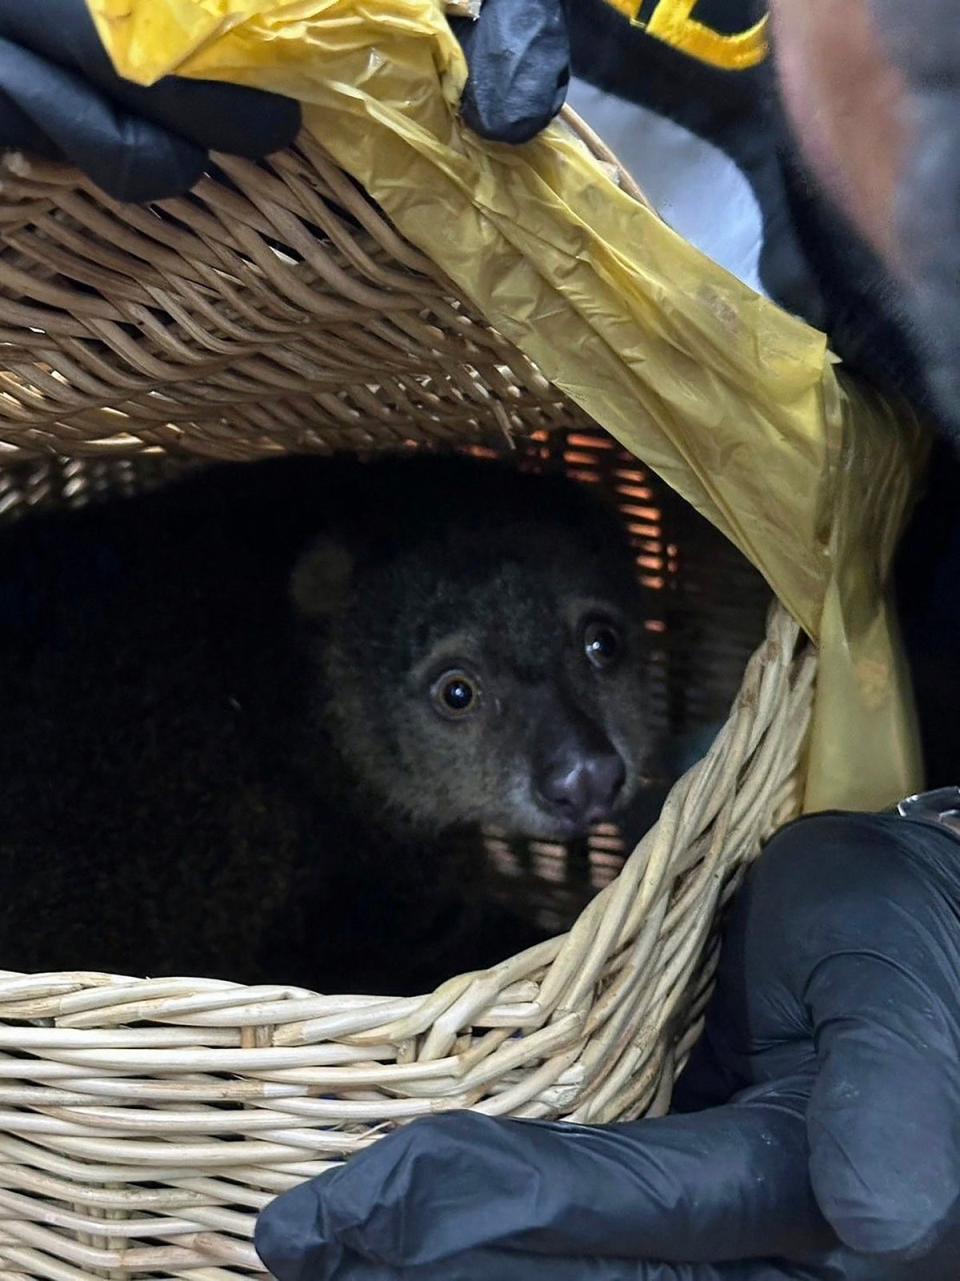 A Sulawesi bear cuscus that was rescued after being found in the luggage of a group of Indian nationals attempting to travel to Mumbai, at Suvarnabhumi International Airport in Bangkok (Thailand's Customs Department/AF)